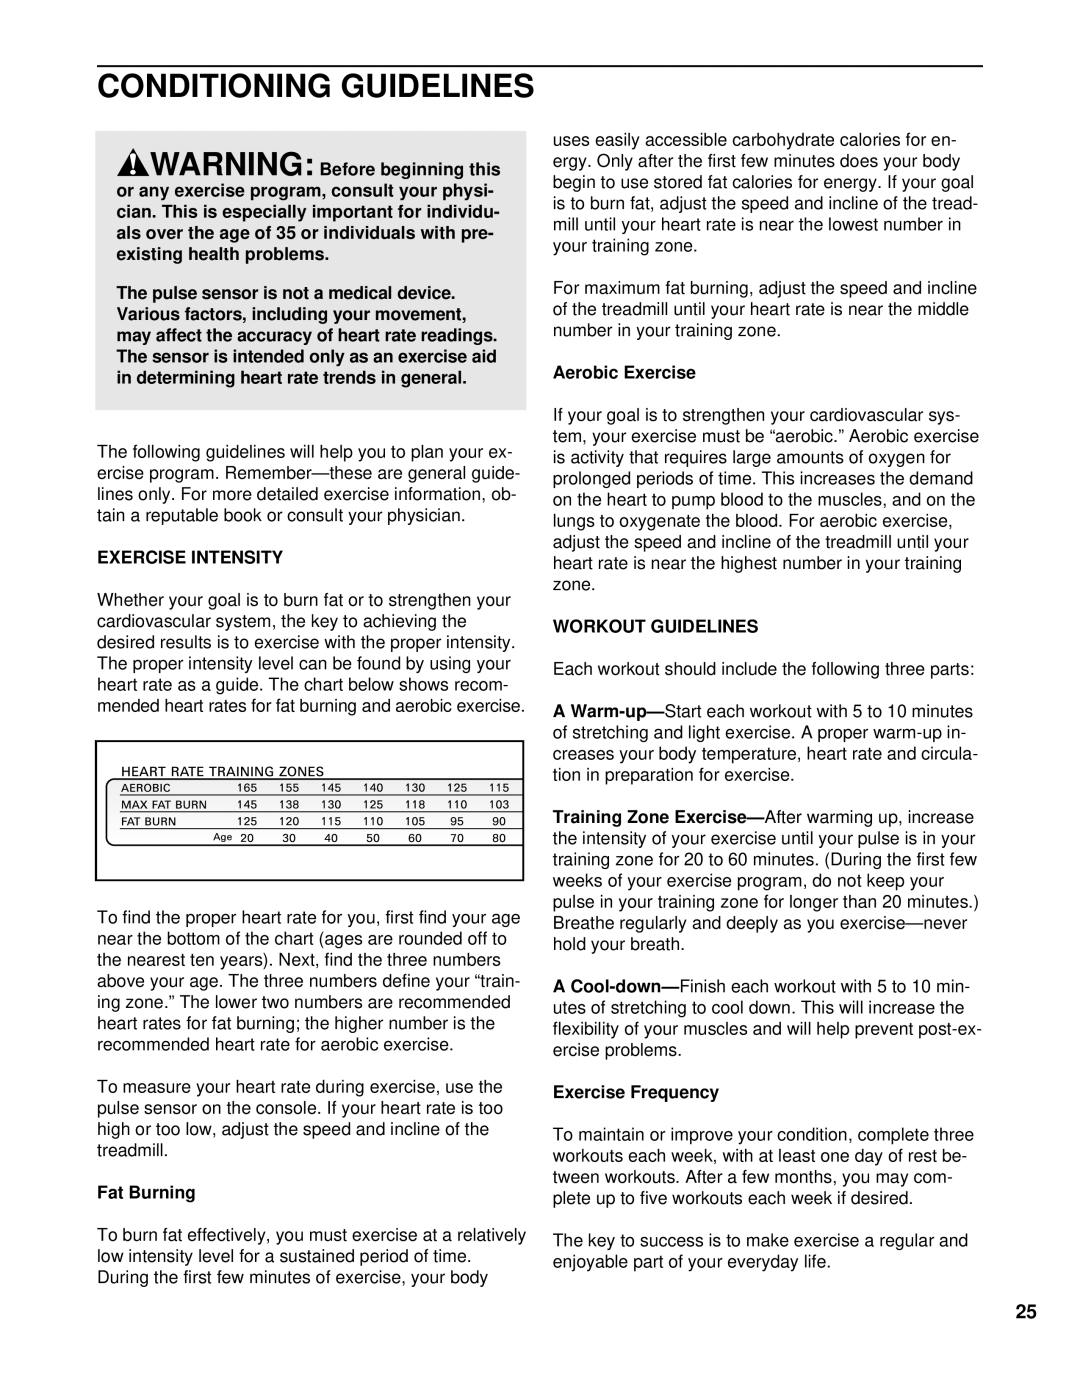 NordicTrack NTTL09994 Conditioning Guidelines, Exercise Intensity, Fat Burning, Aerobic Exercise, Workout Guidelines 